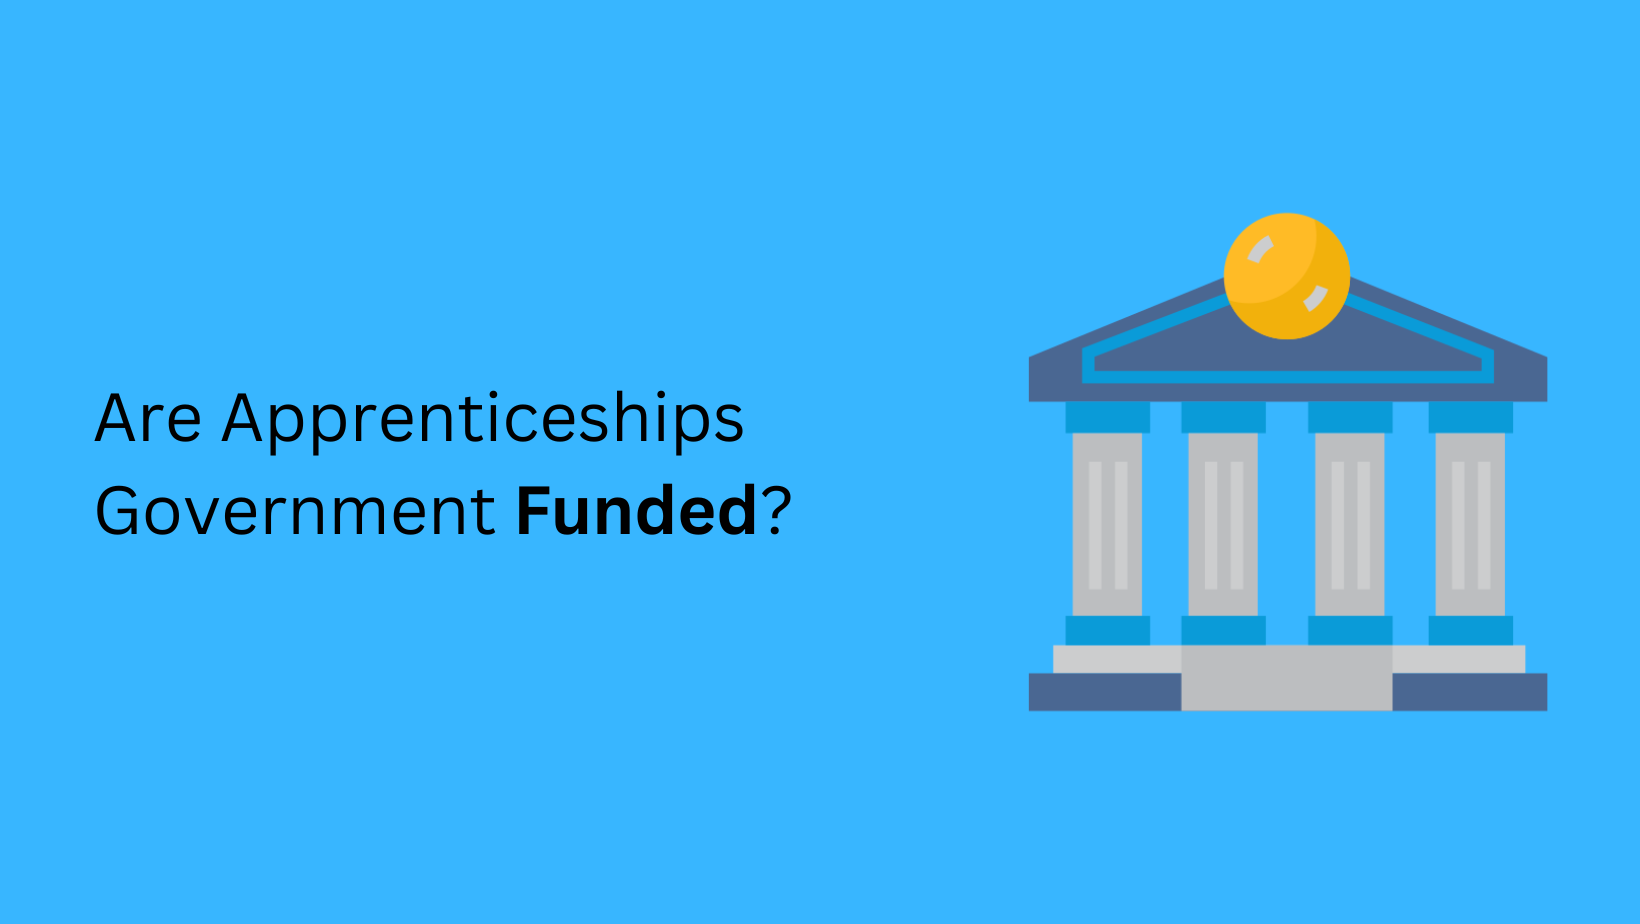 Are Apprenticeships Government Funded